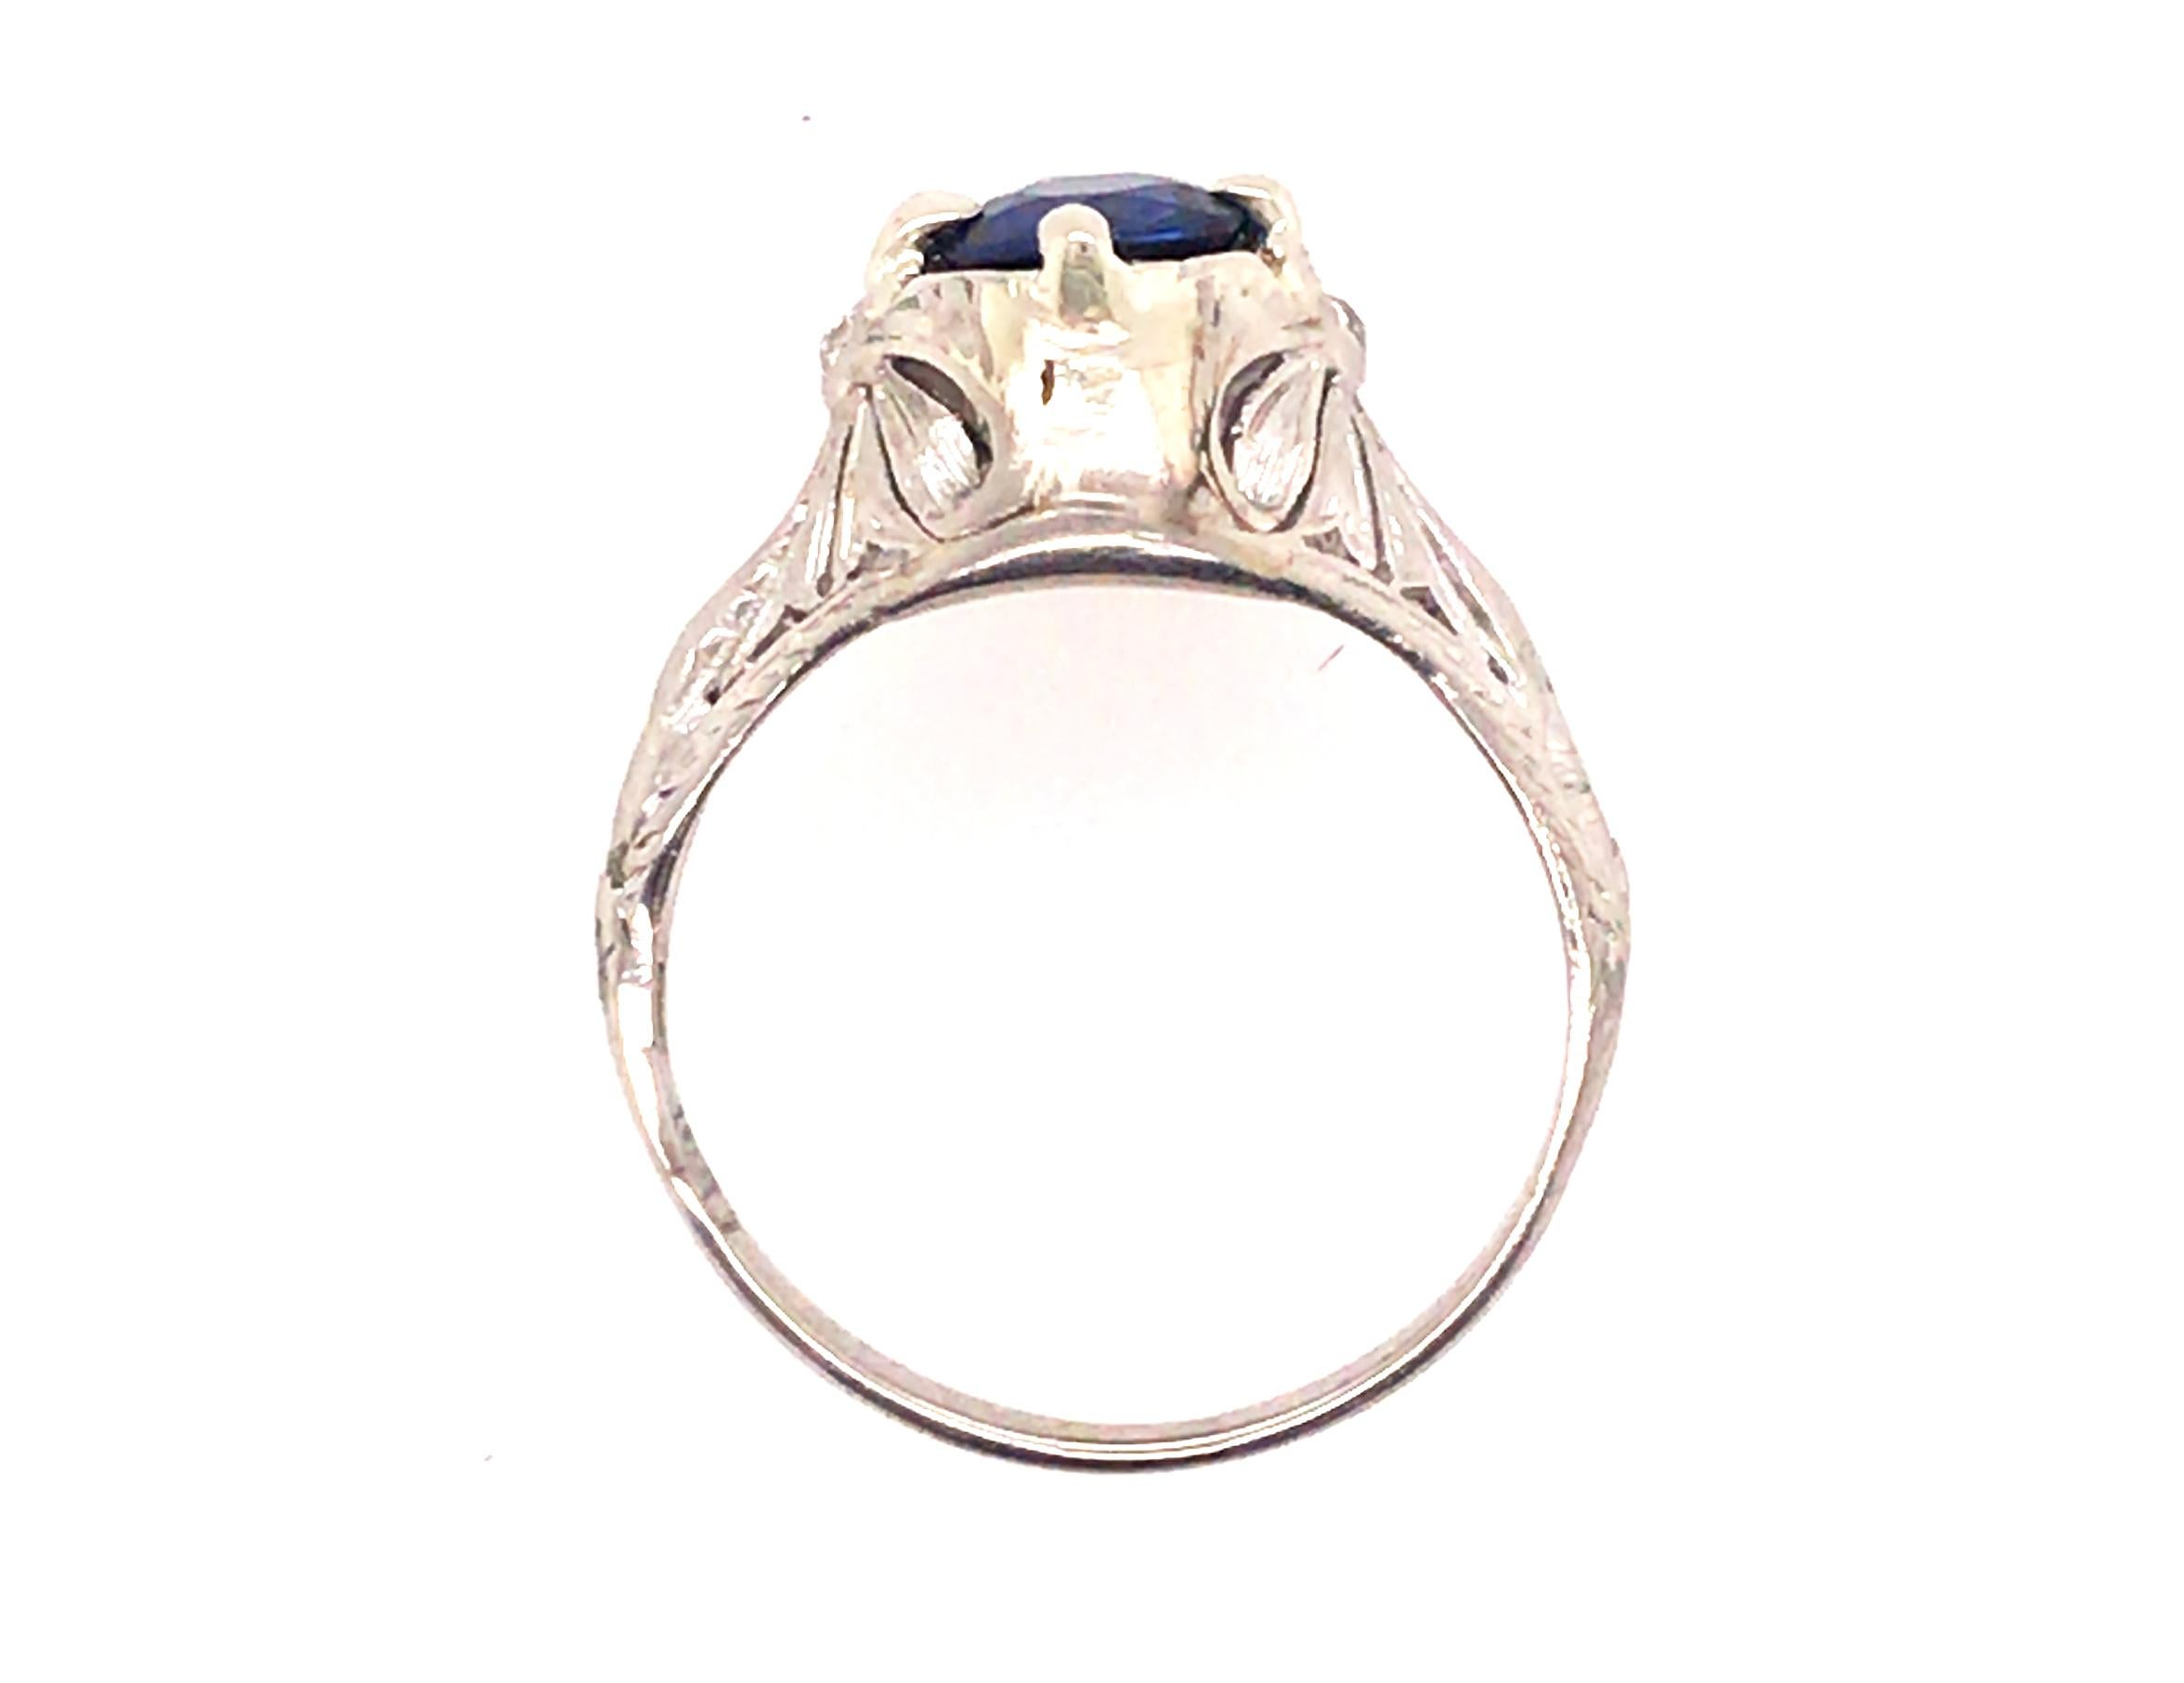 Genuine Original Art Deco Antique from 1930's Sapphire Diamond Engagement Ring 1.14ct Platinum 


Featuring a Stunning 1.10ct Genuine Natural Blue Round Sapphire Center

On Either Side of the Sapphire Center Are Two Genuine Old Mine Cut Natural